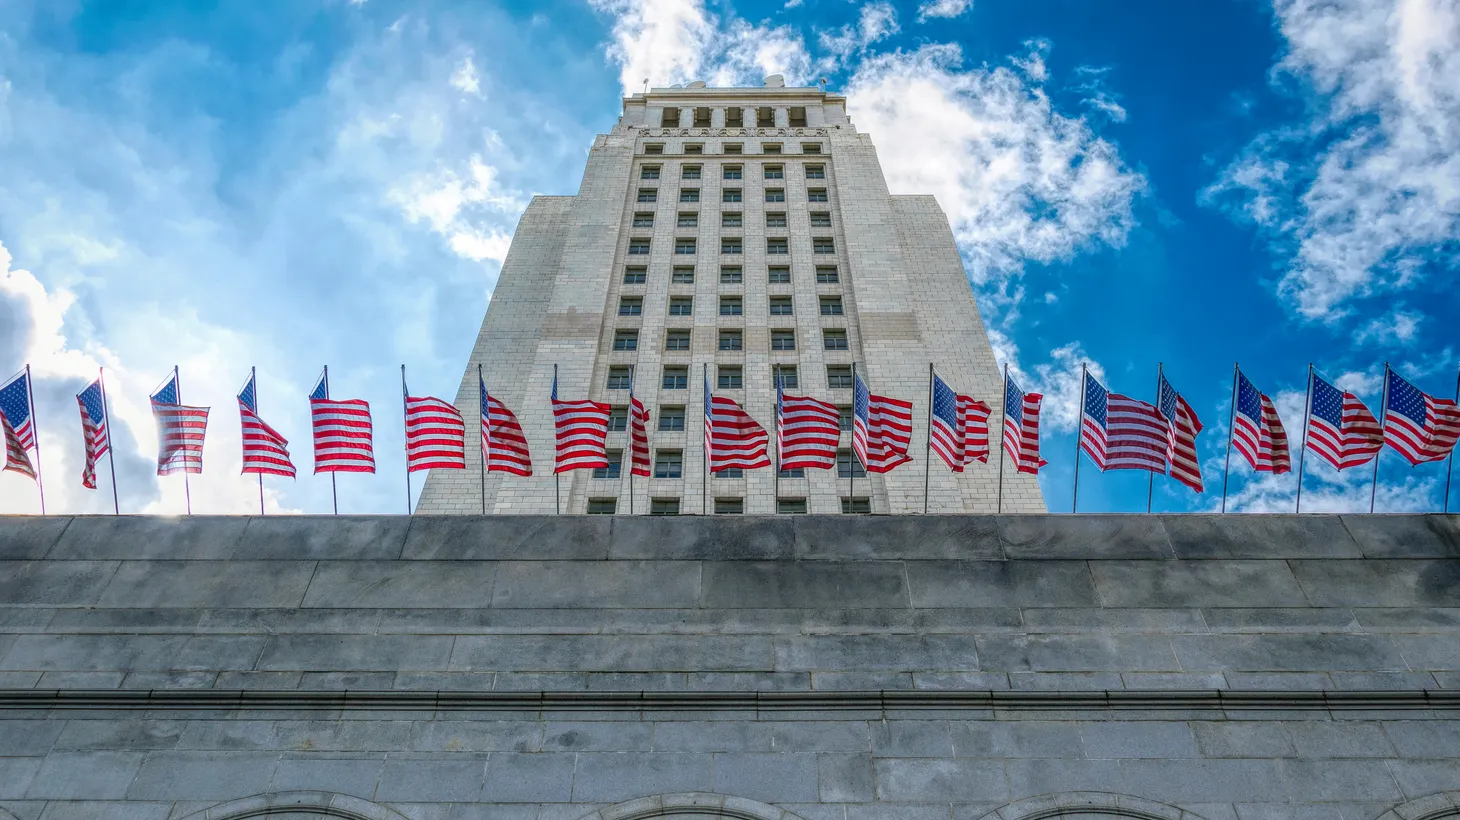 Three Latino members of the LA City Council are facing calls to resign after audio was leaked of racist remarks they made in a meeting last year.